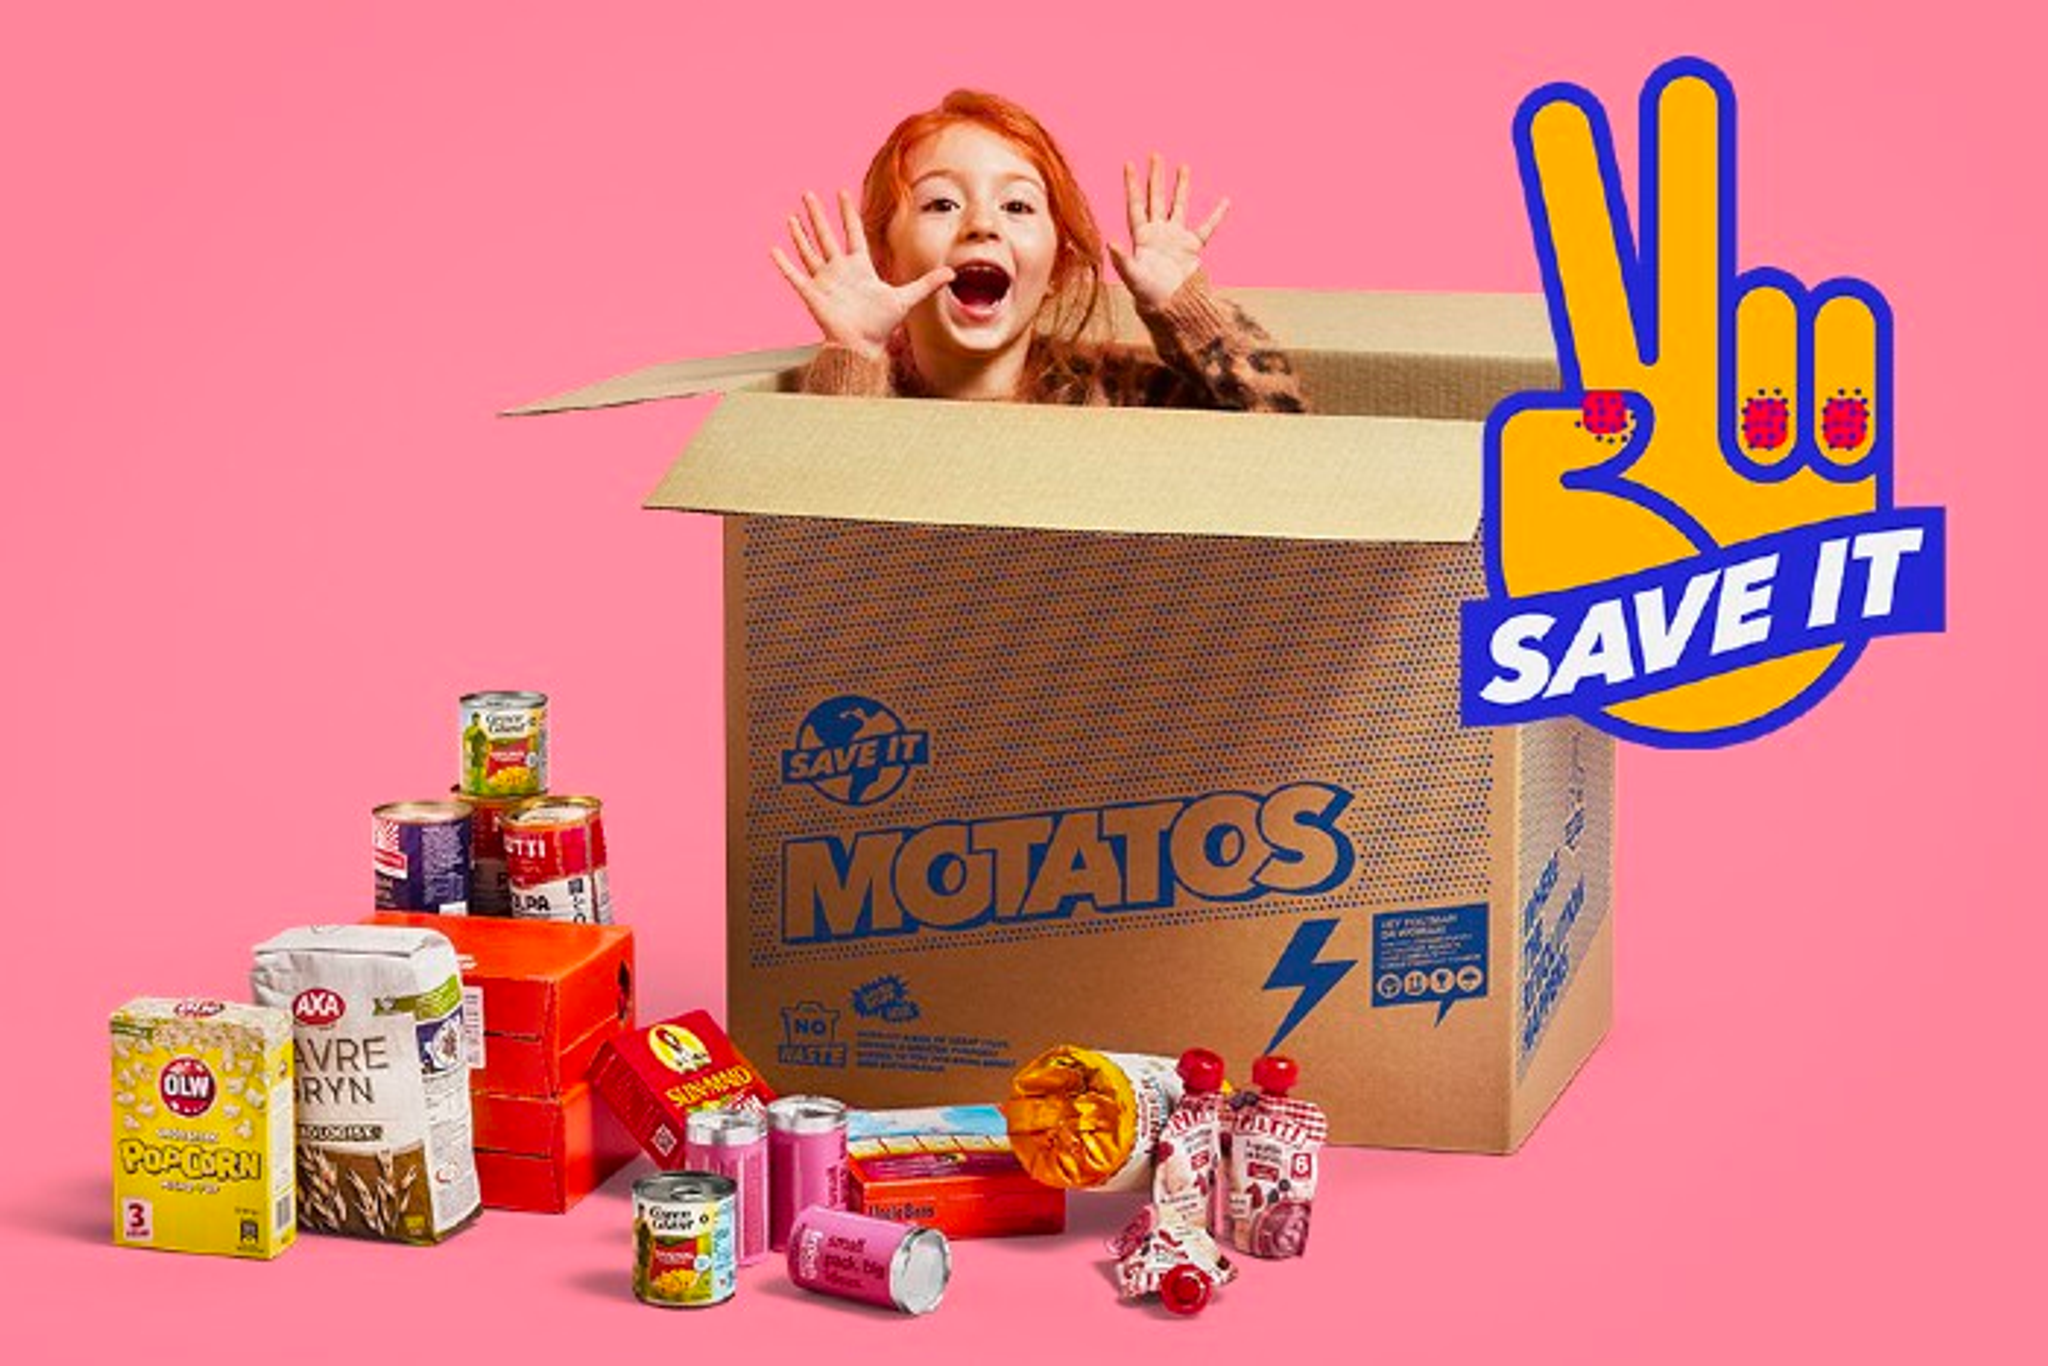 Motatos launch helps UK shoppers cut costs and waste